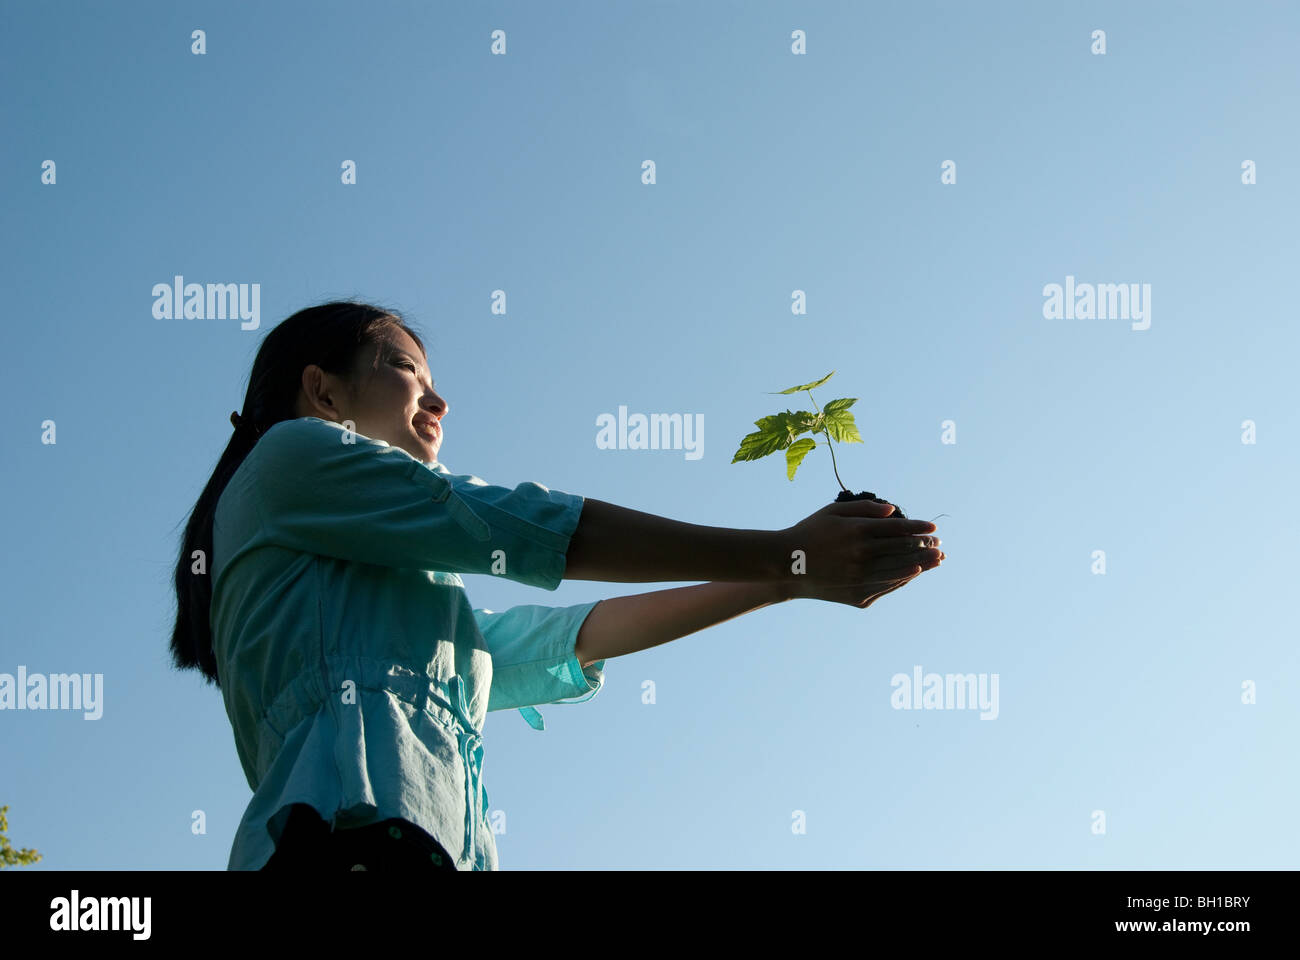 Young woman with outstretched arms holding seedling, Assiniboine Park, Winnipeg, Manitoba, Canada Stock Photo